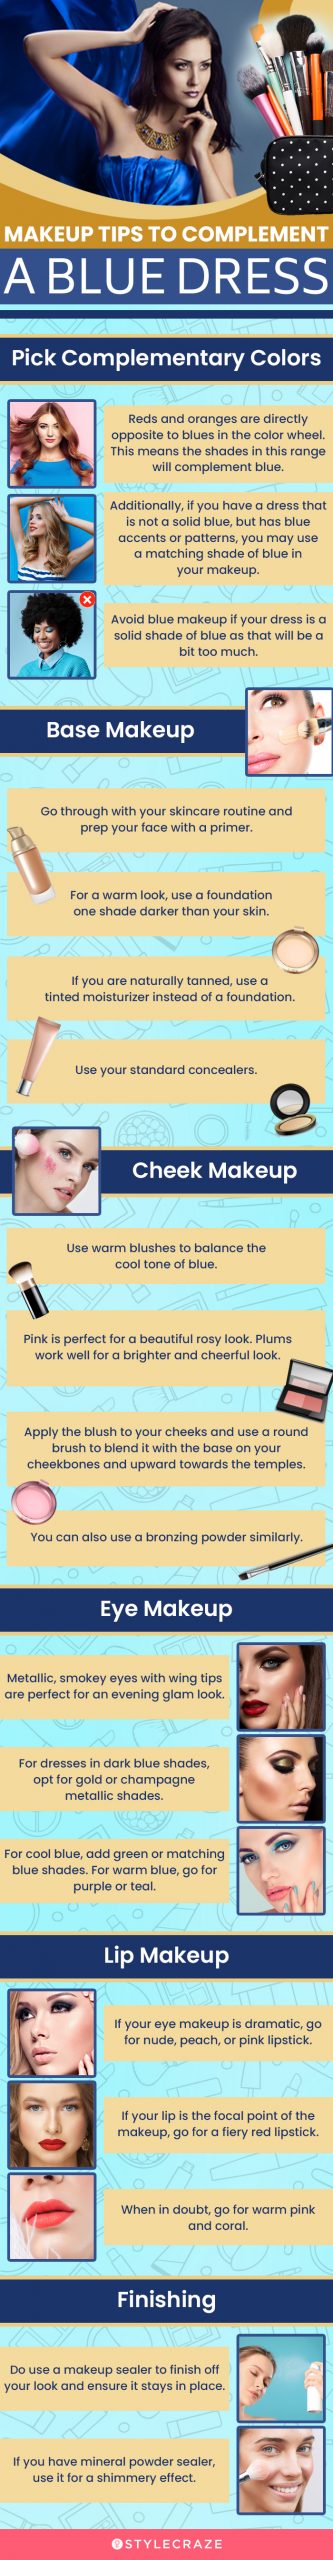 makeup tips to complete a blue dress (infographic)